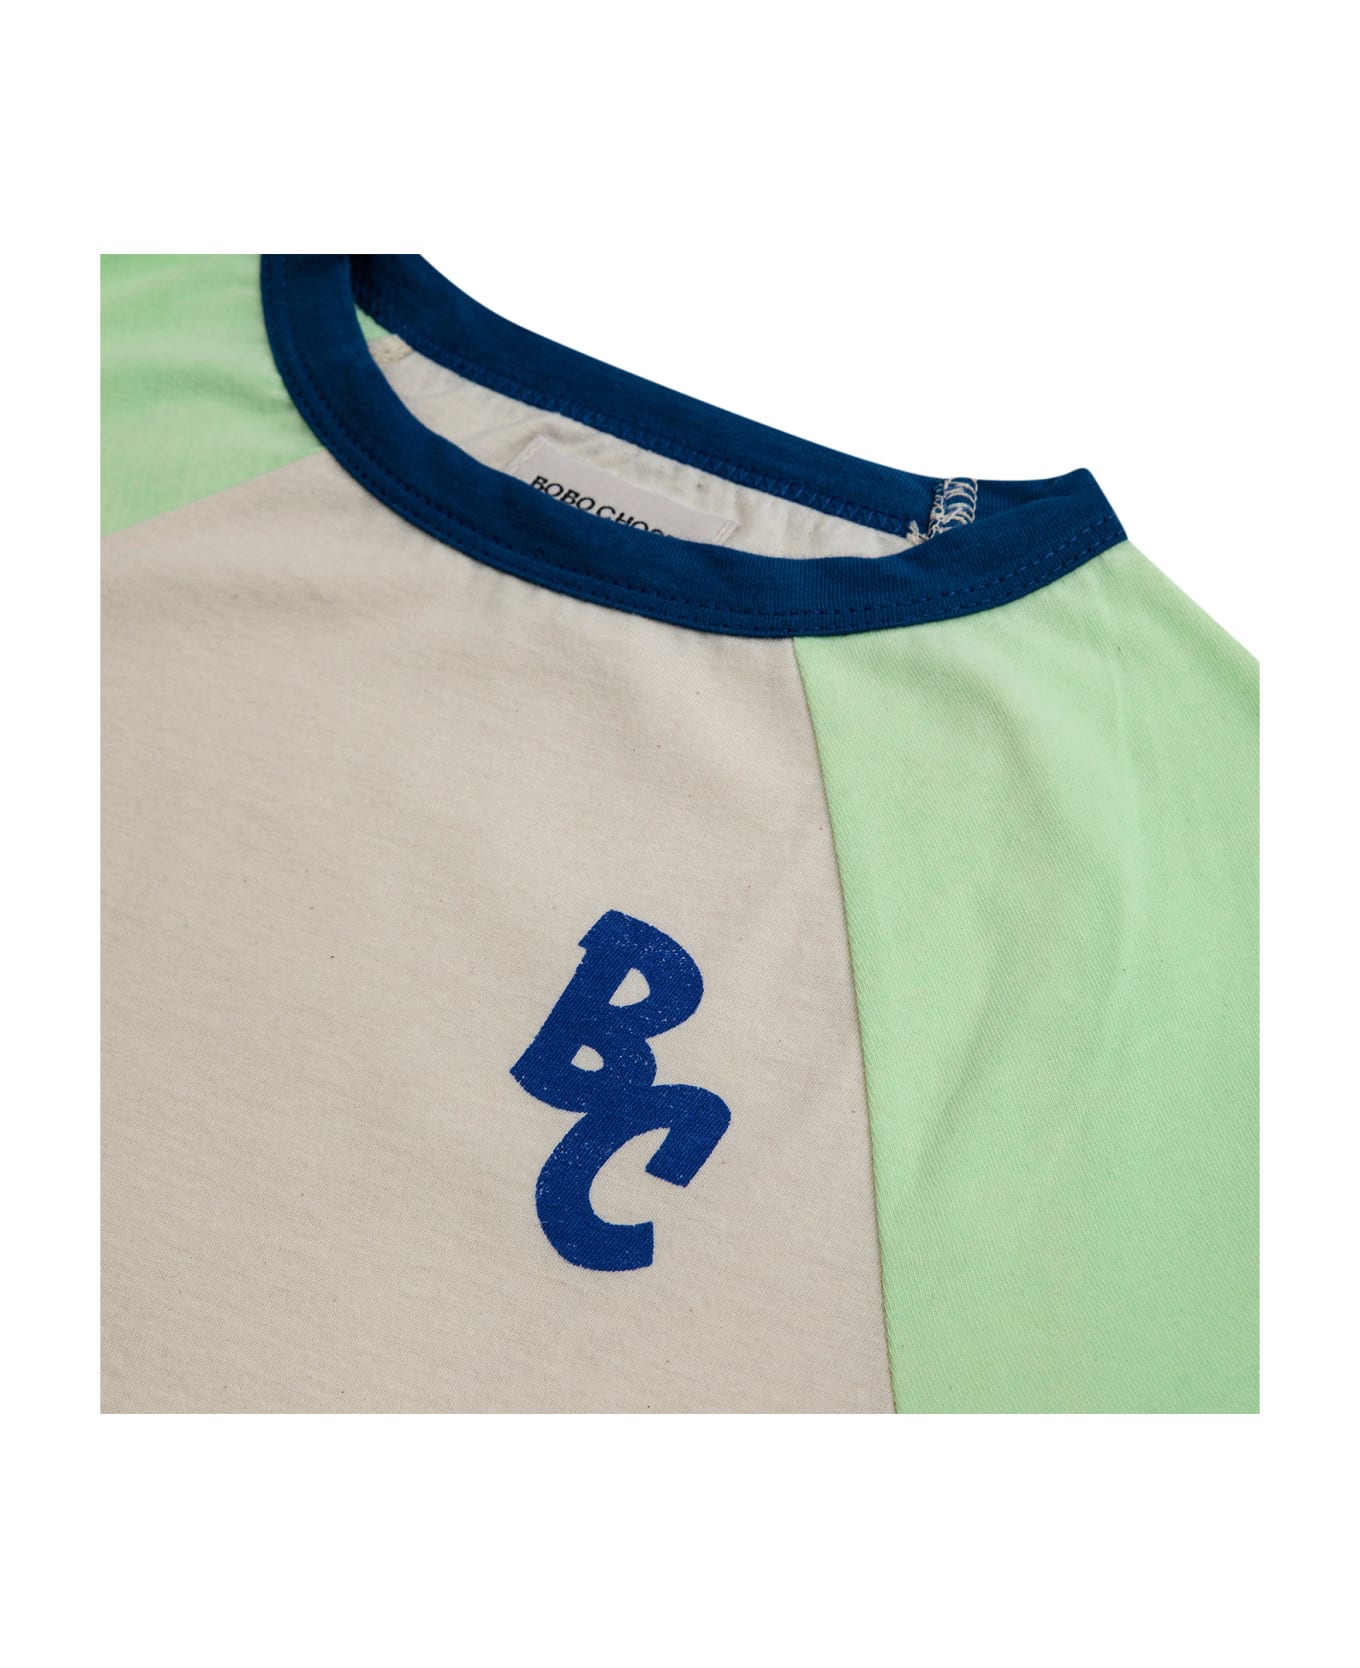 Bobo Choses Multicolor T-shirt For Kids With Logo - Multicolor